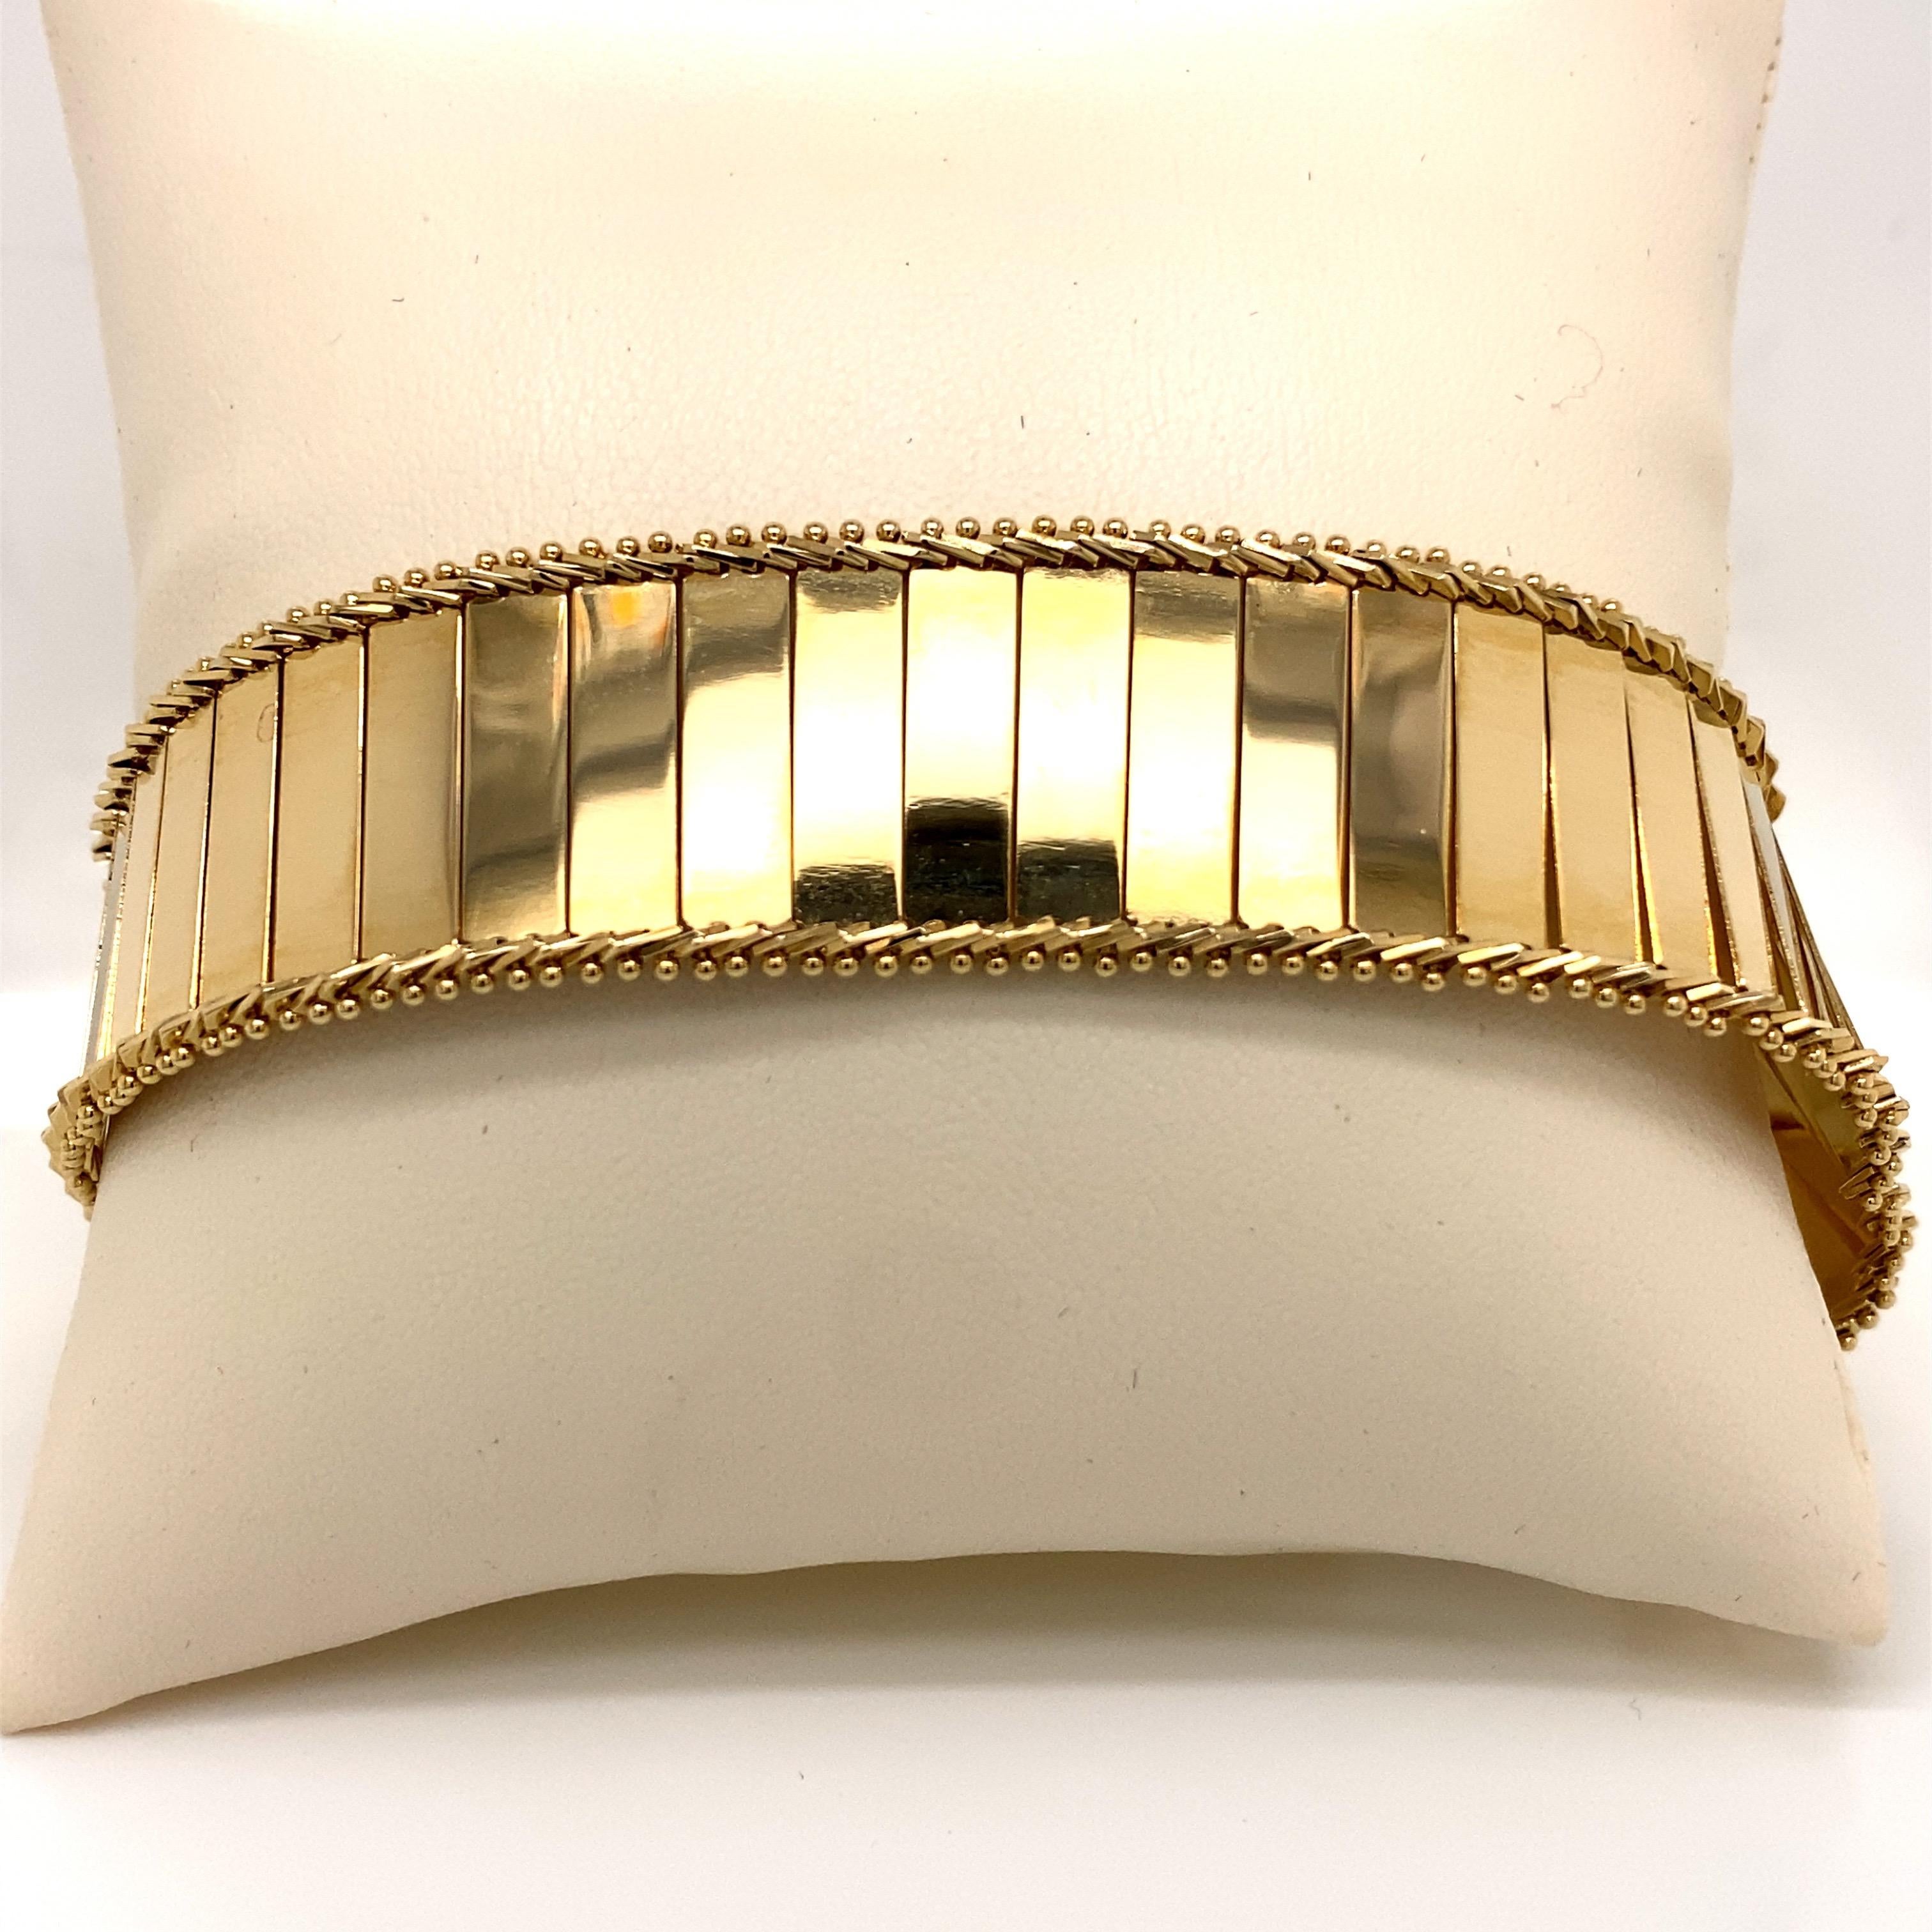 Vintage 1980s 14K Yellow Gold Wide Mirror Finish Link Bracelet - The bracelet measures 7 inches long and .75 inches wide. The bracelet is finished with a fox link border and weighs 24.6 grams.